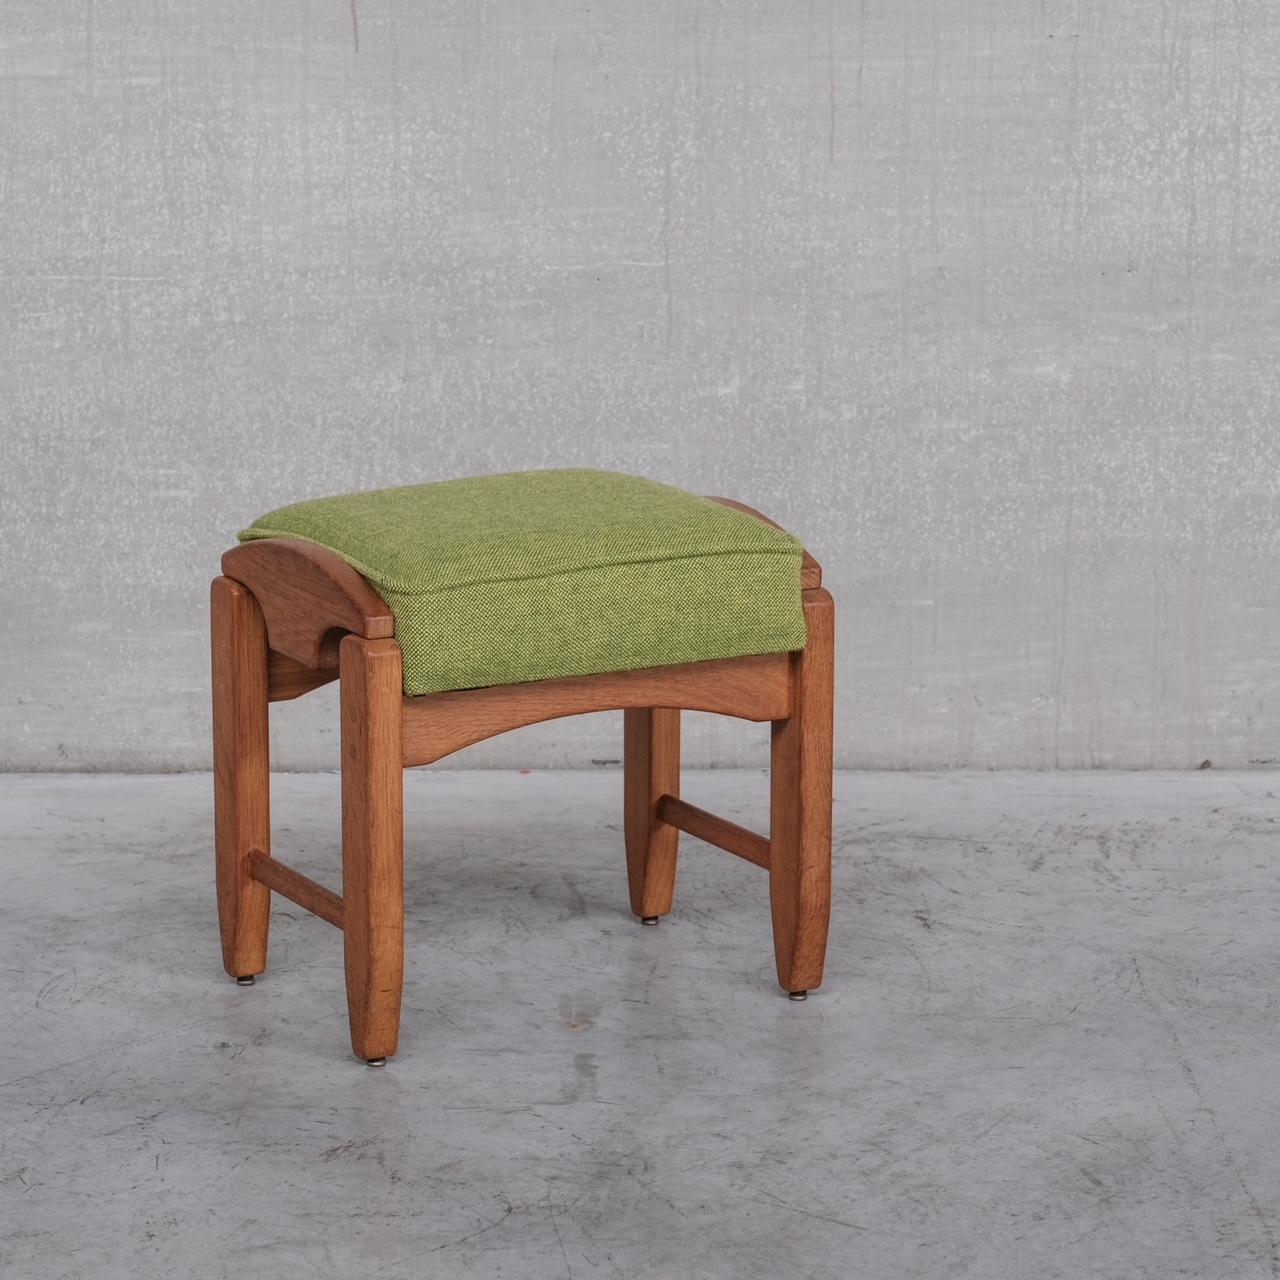 A rare Guillerme et Chambron stool. 

France, c1960s. 

Scarce model, of curved form. 

The green upholstery remains in good condition but is ripe for a more neutral proposition too. 

Location: Belgium Gallery. 

Dimensions: 45 W x 39 D x